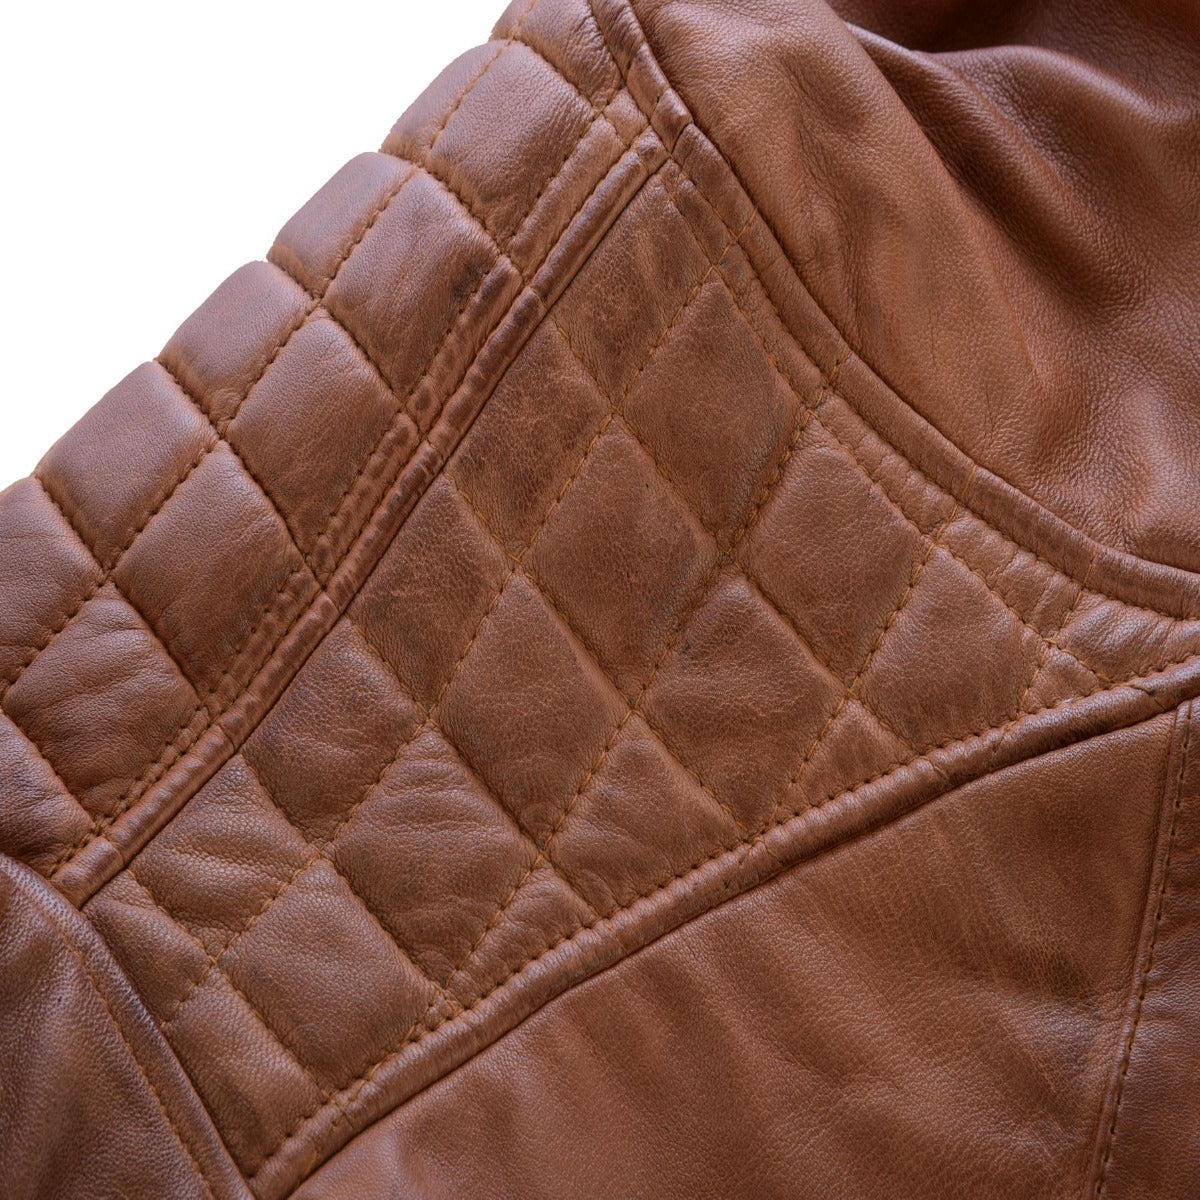 A close up of the Vance Cafe Racer Austin Brown Leather Jacket.